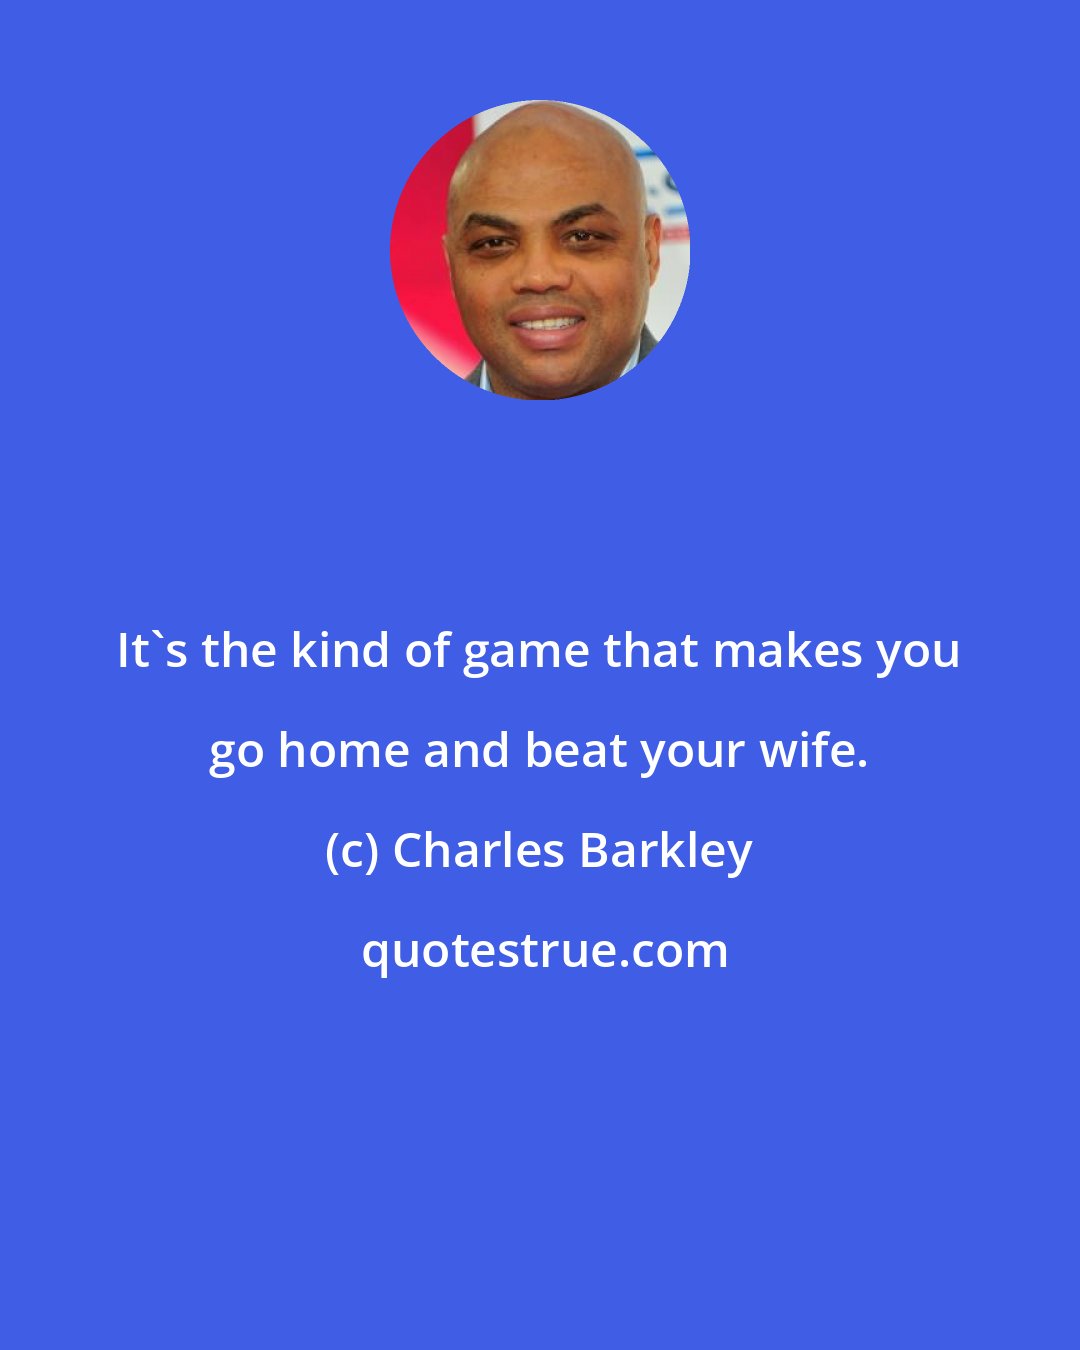 Charles Barkley: It's the kind of game that makes you go home and beat your wife.